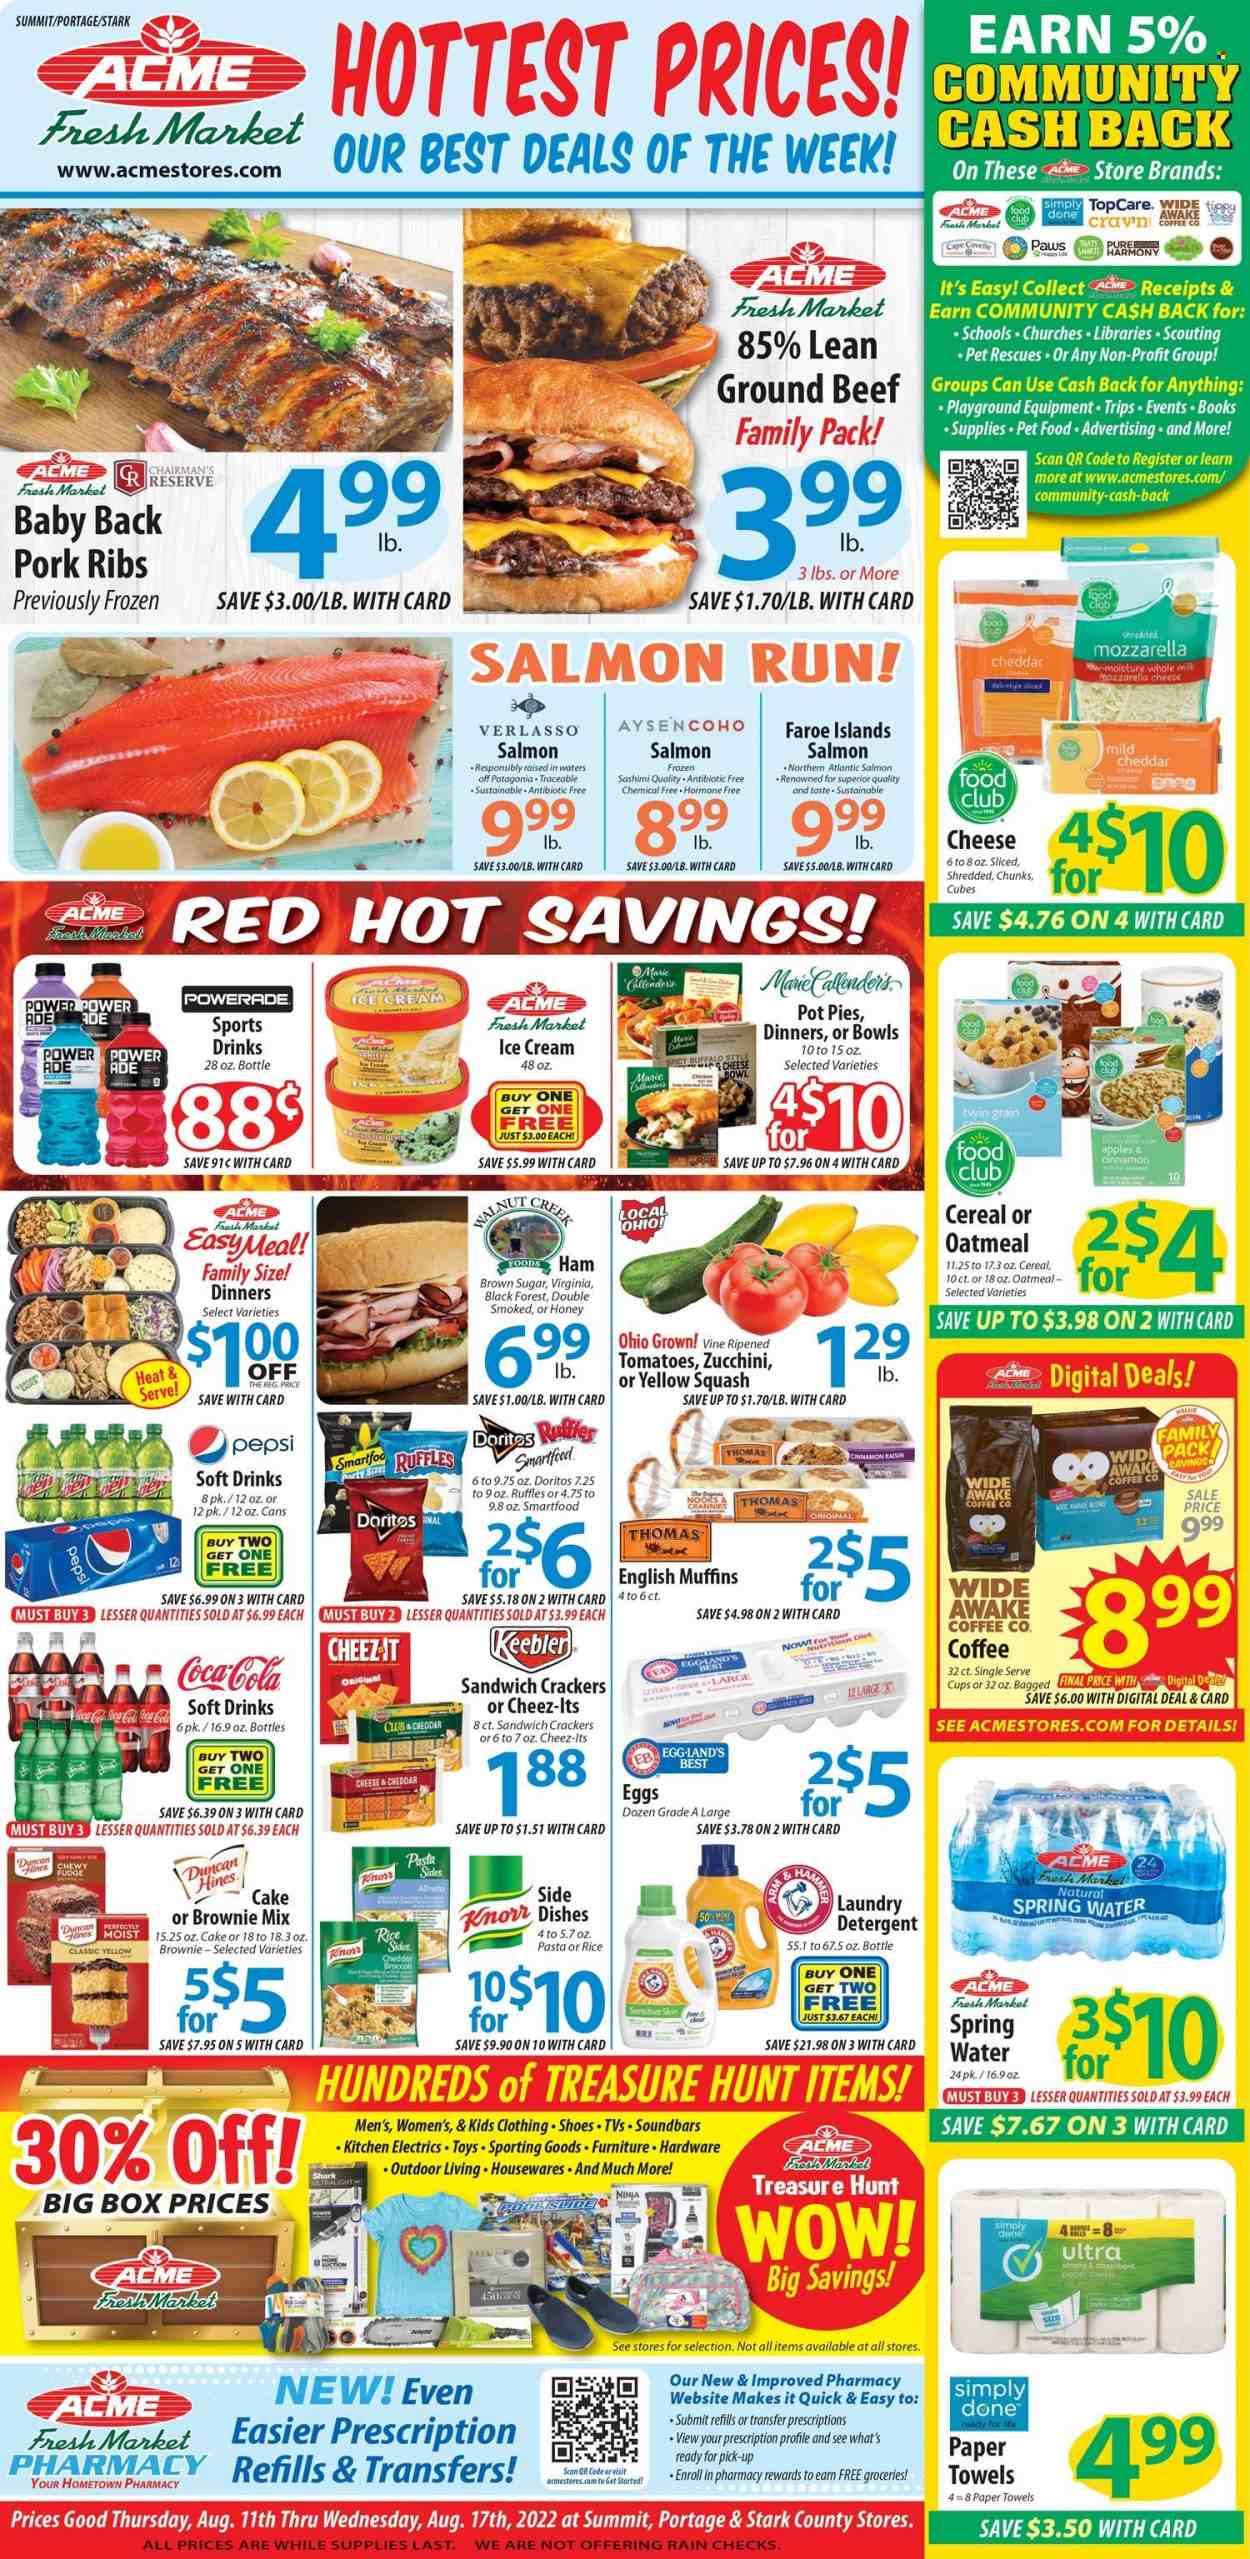 thumbnail - ACME Fresh Market Flyer - 08/11/2022 - 08/17/2022 - Sales products - english muffins, cake, Ace, pot pie, brownie mix, zucchini, yellow squash, apples, salmon, Knorr, Marie Callender's, pasta sides, ham, mild cheddar, mozzarella, eggs, ice cream, crackers, Keebler, Doritos, Smartfood, Ruffles, oatmeal, cereals, rice, Coca-Cola, Powerade, Pepsi, soft drink, spring water, coffee, beef meat, ground beef, pork meat, pork ribs, pork back ribs, kitchen towels, paper towels, detergent, laundry detergent, Paws. Page 1.